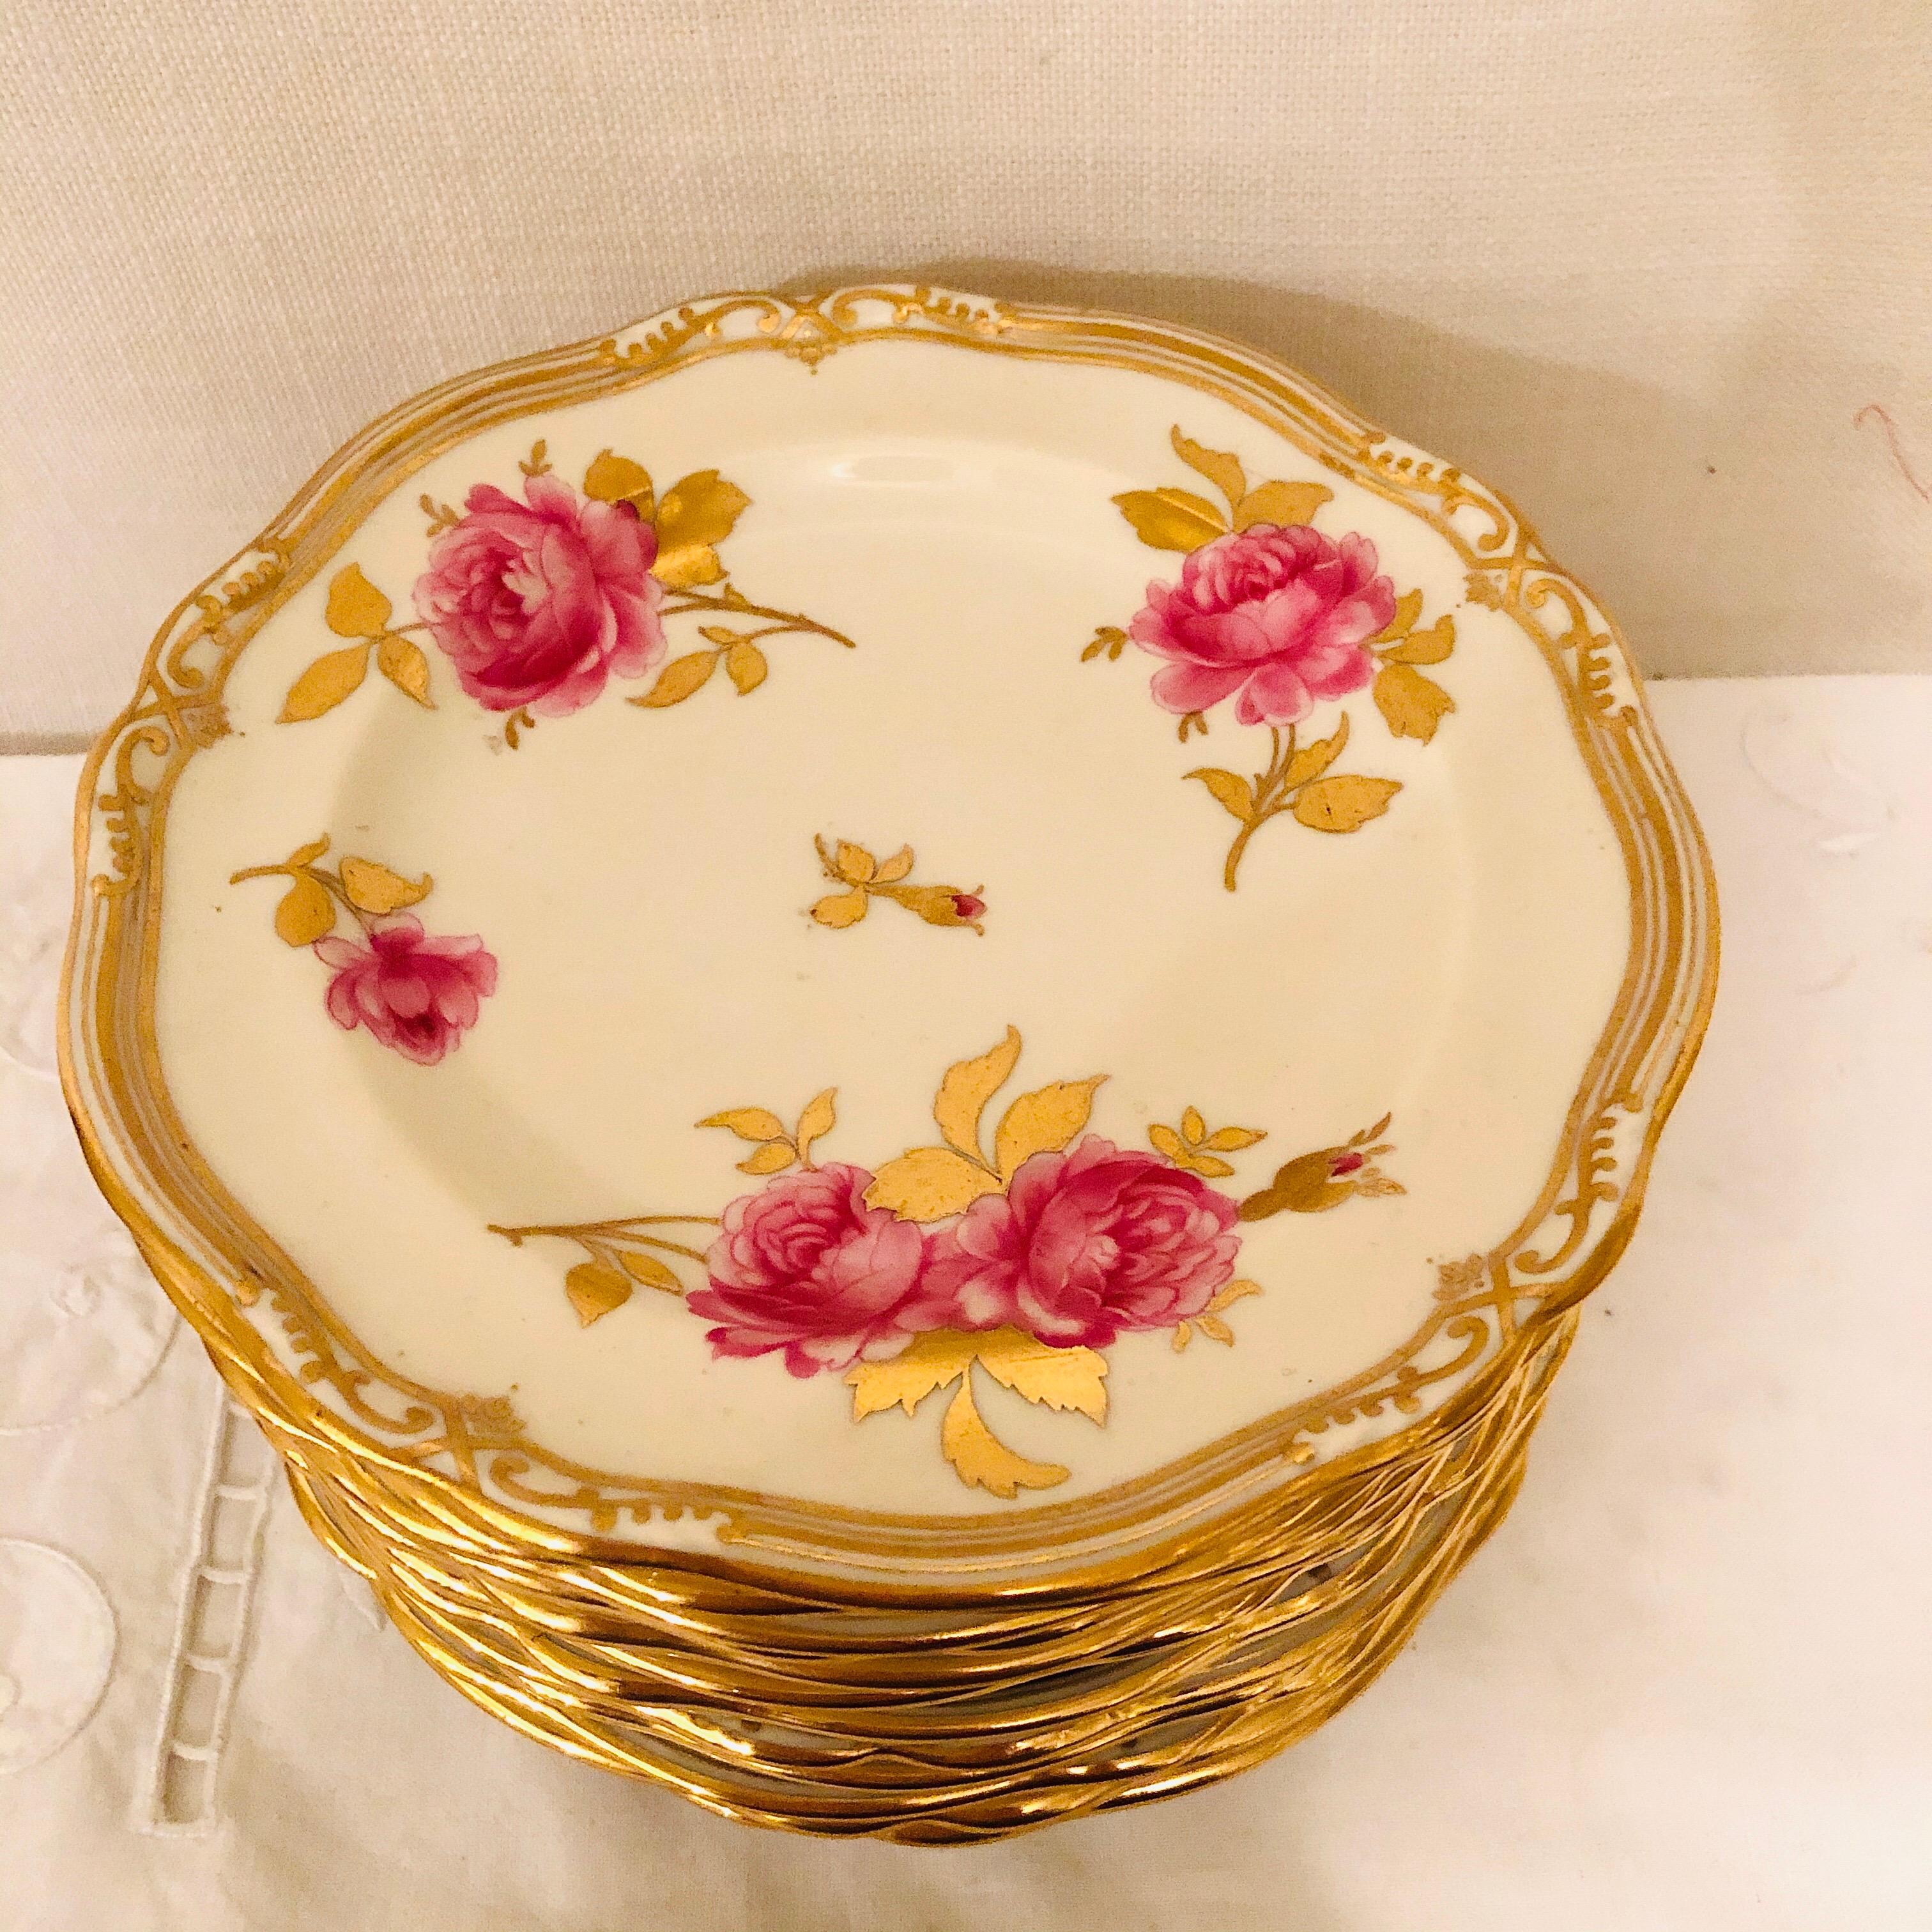 Spode Made for Tiffany 66 Piece Dinner Service Decorated with Large Pink Roses 1